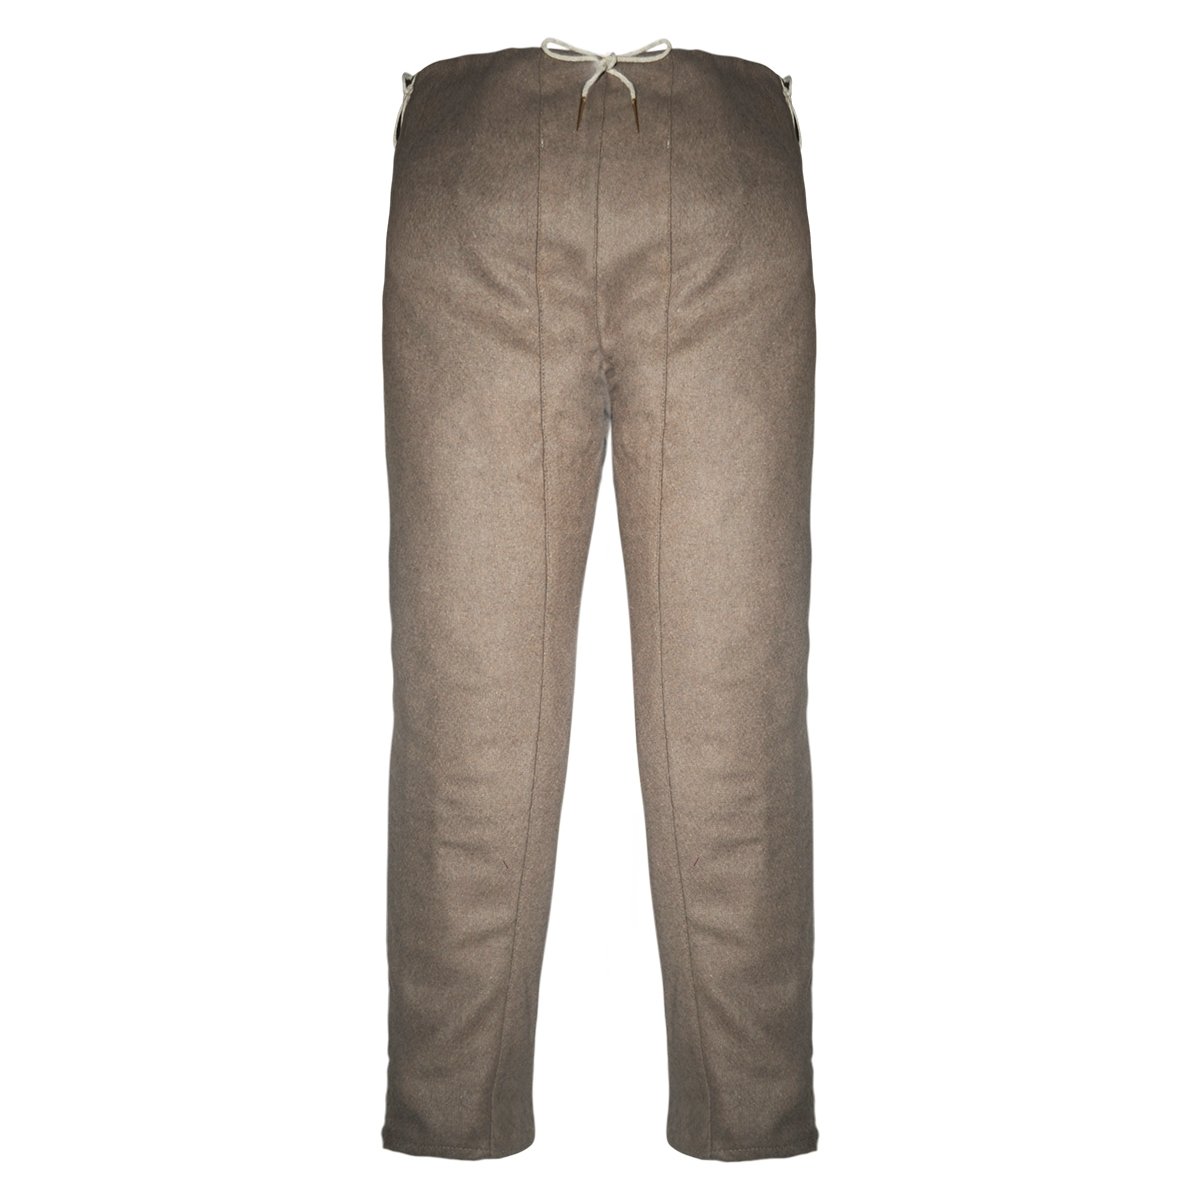 Man's 15th C. Trousers - Natural Brown, Size M